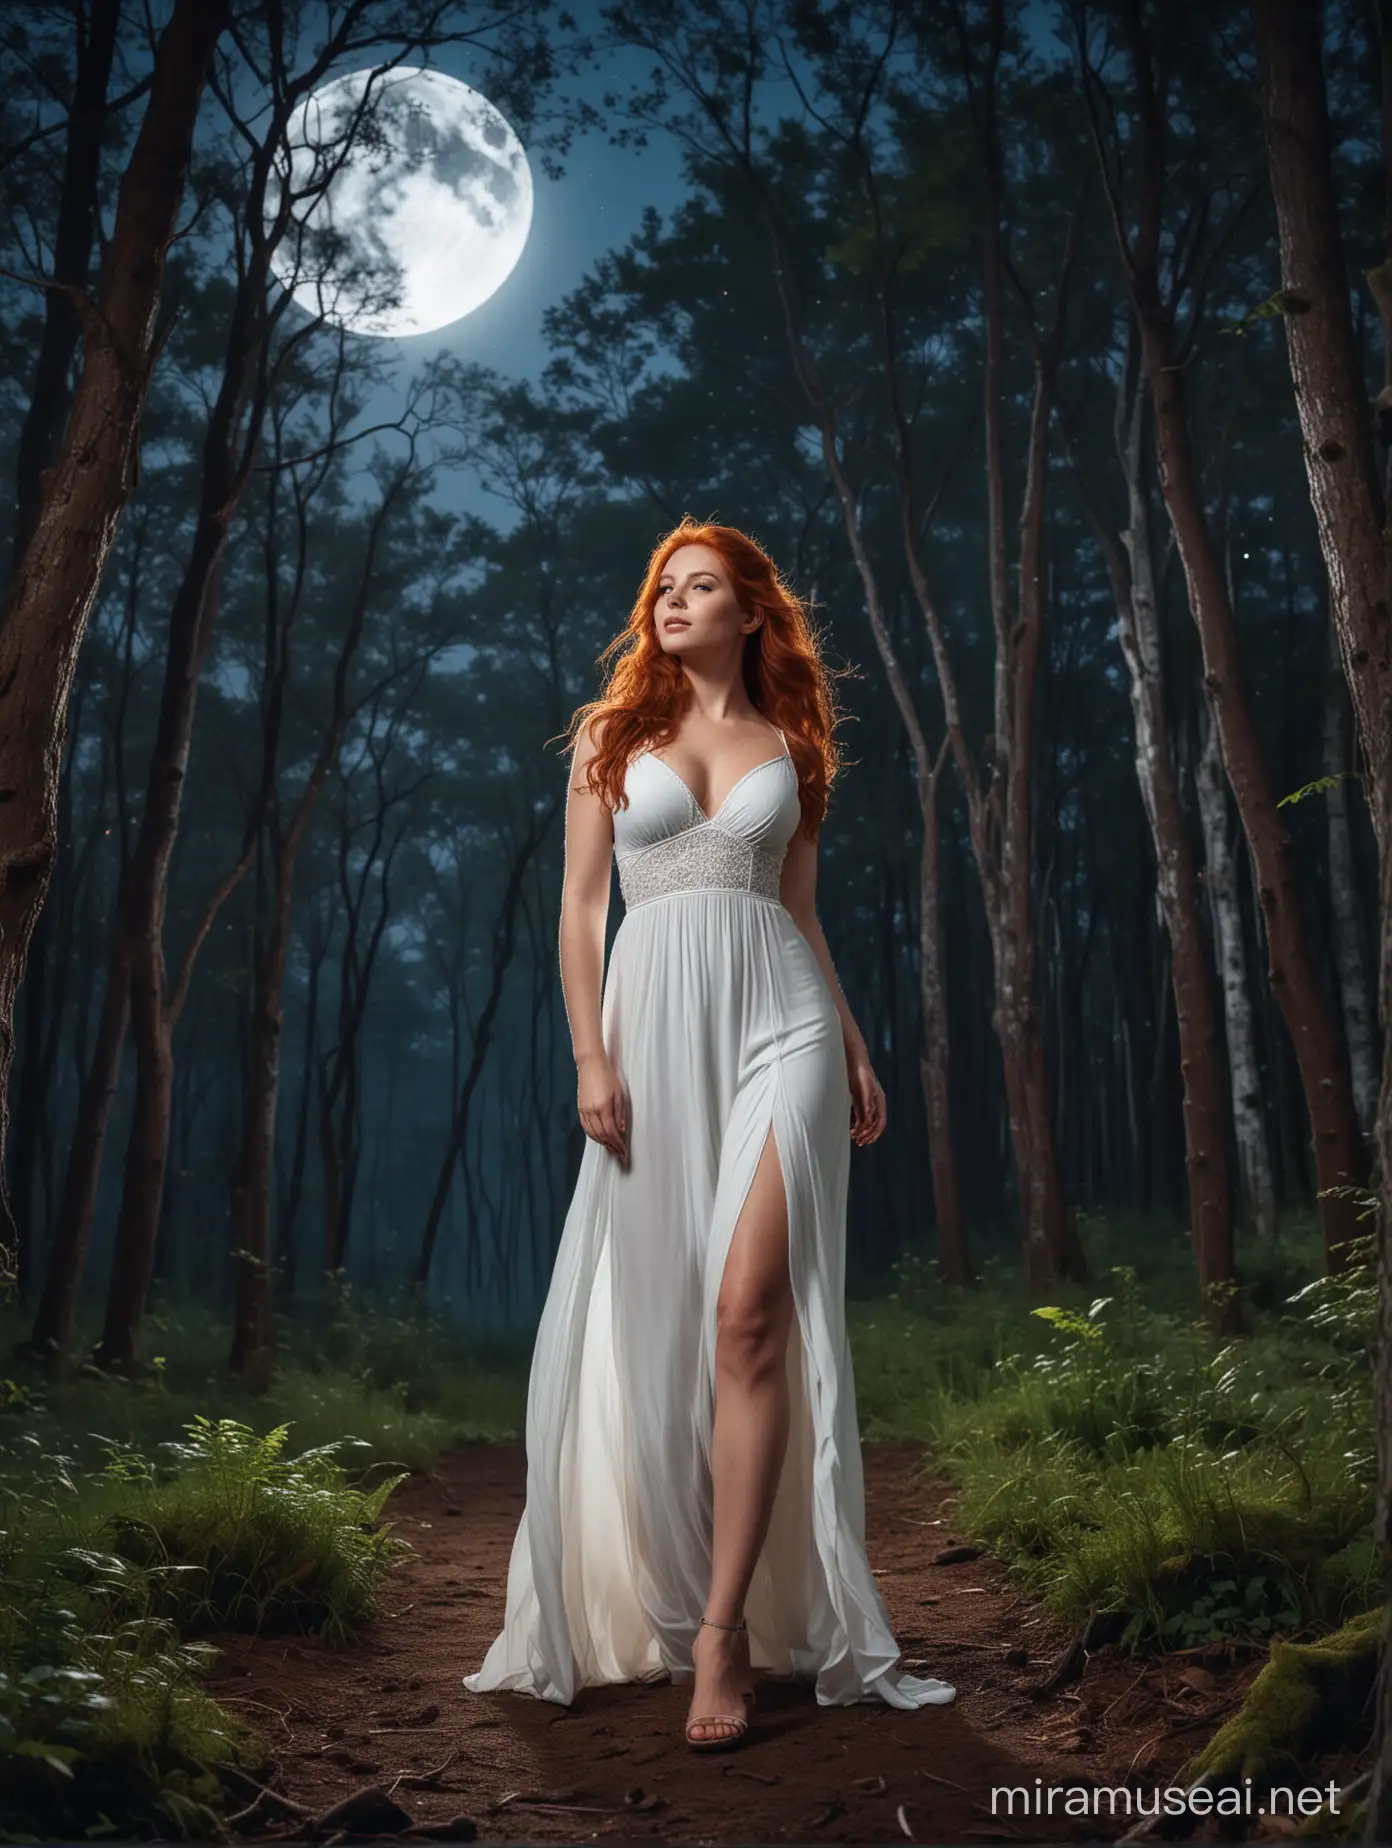 Enchanting RedHaired Woman in White Dress Under Full Blue Moon in Forest